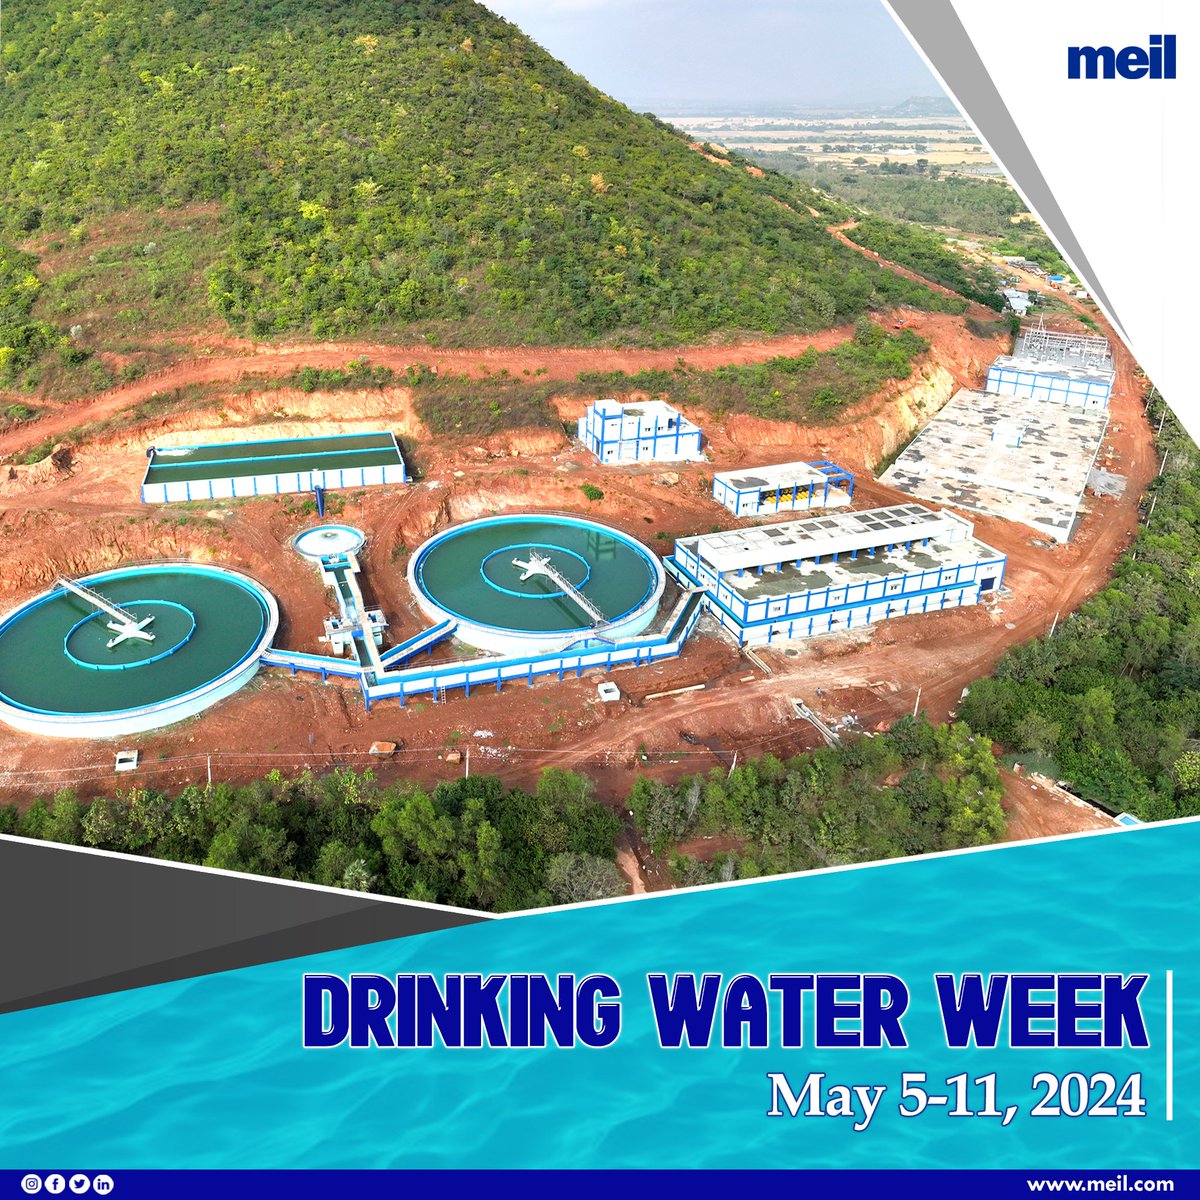 It's #DrinkingWaterWeek! This week, we celebrate the value of clean, safe water & the vital role of #waterinfrastructure. #MEIL is proud to be part of constructing several #drinkingwater projects globally, giving millions access to a healthier future.
#MeghaEngineering